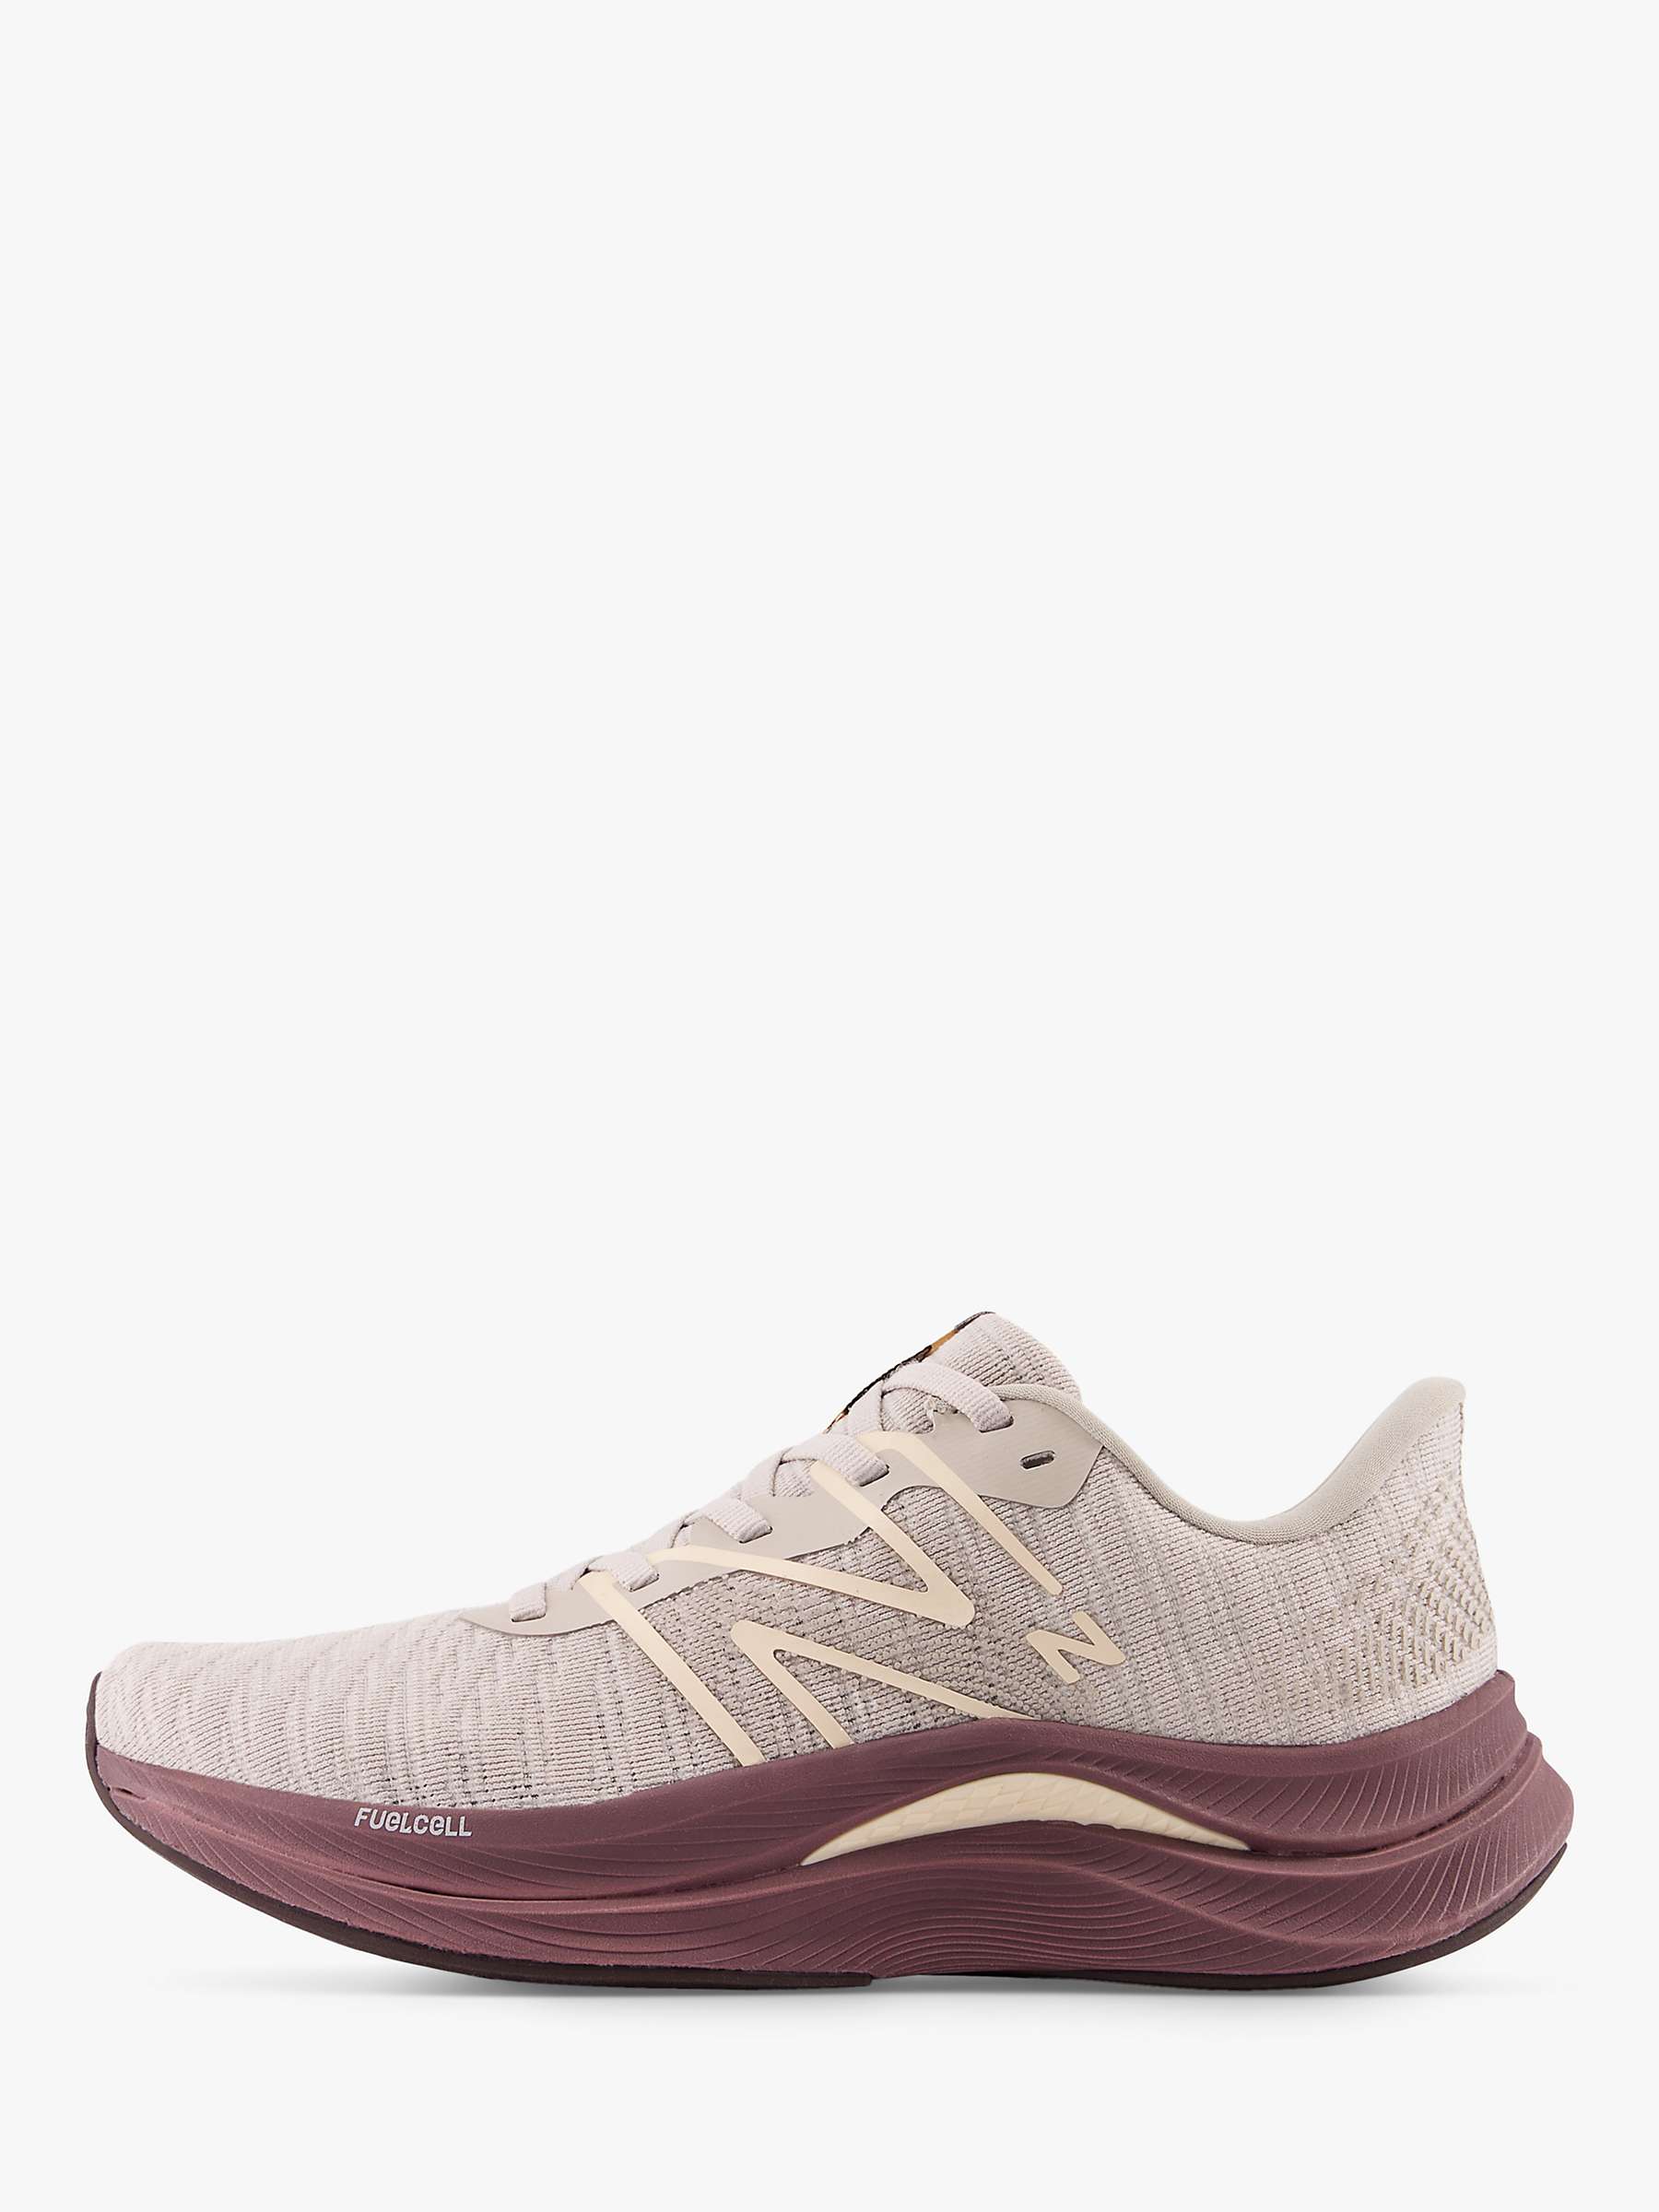 Buy New Balance FuelCell Propel v4 Women's Running Shoes, Moonrock Online at johnlewis.com